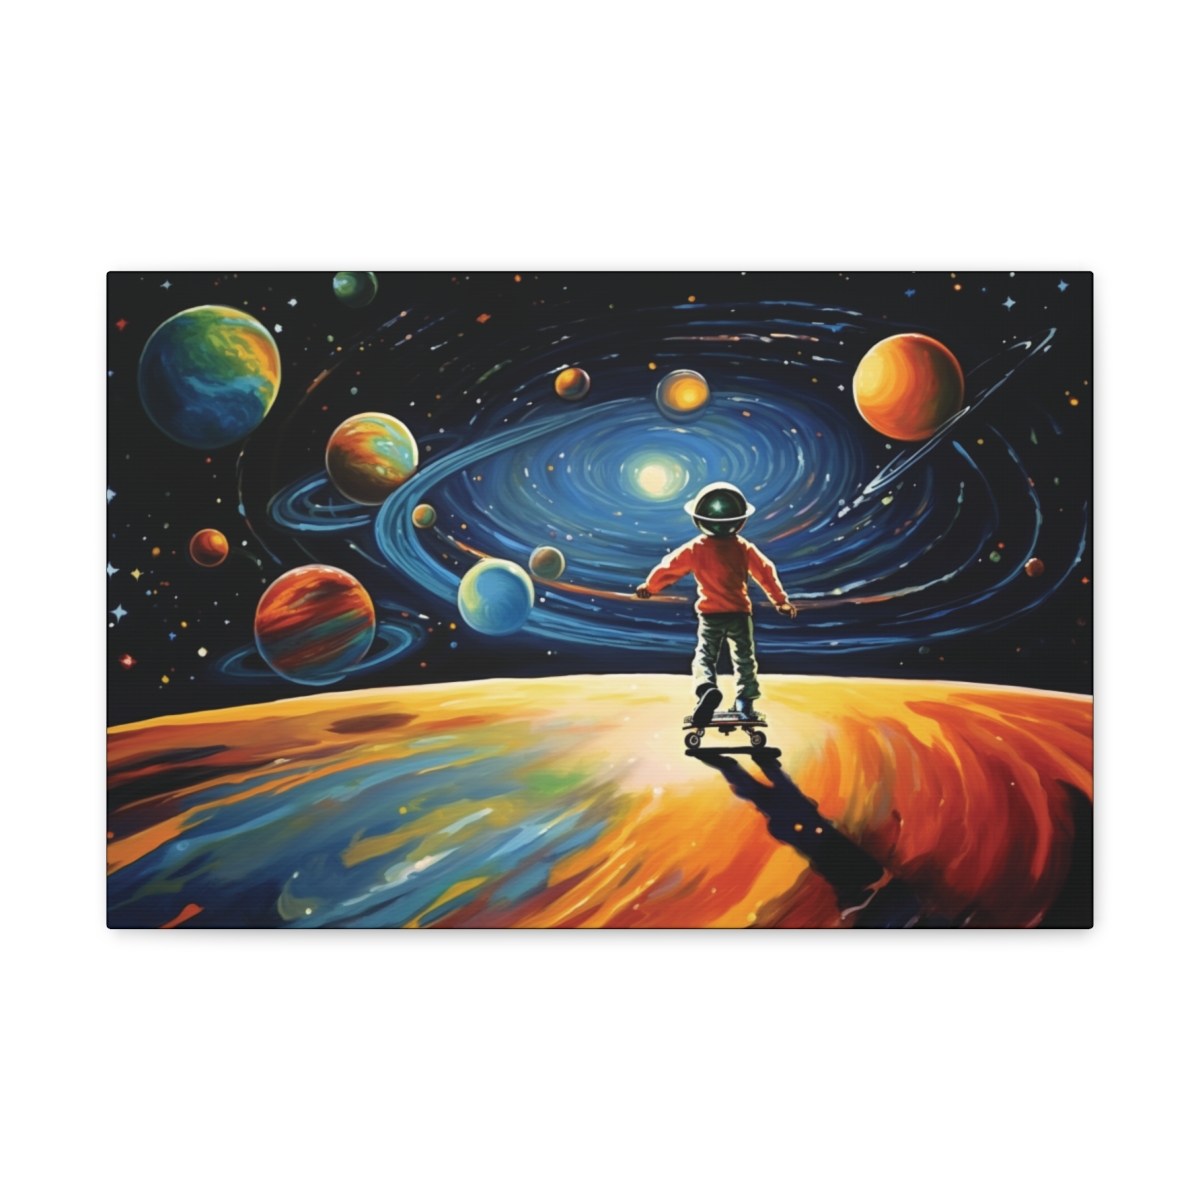 Retro 50s Space Art Canvas Print: The Best Roller Rink Ever